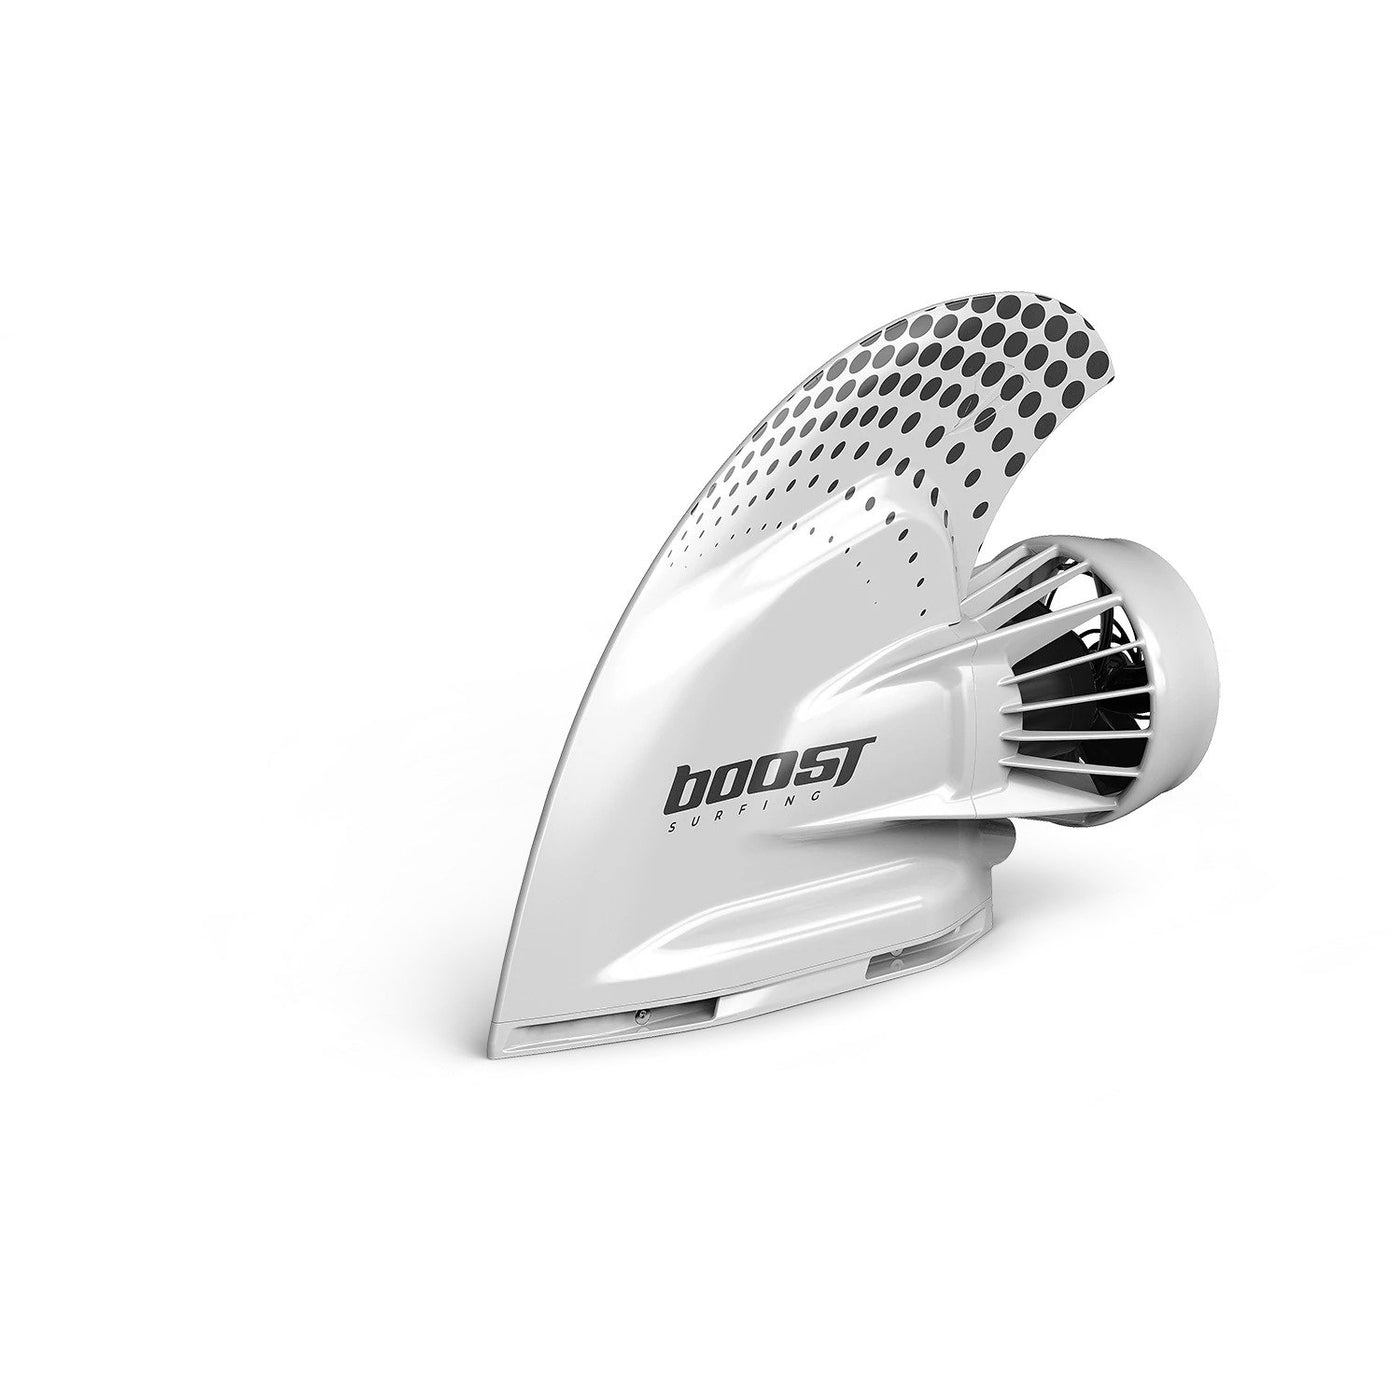 Boost Surfing electric fin